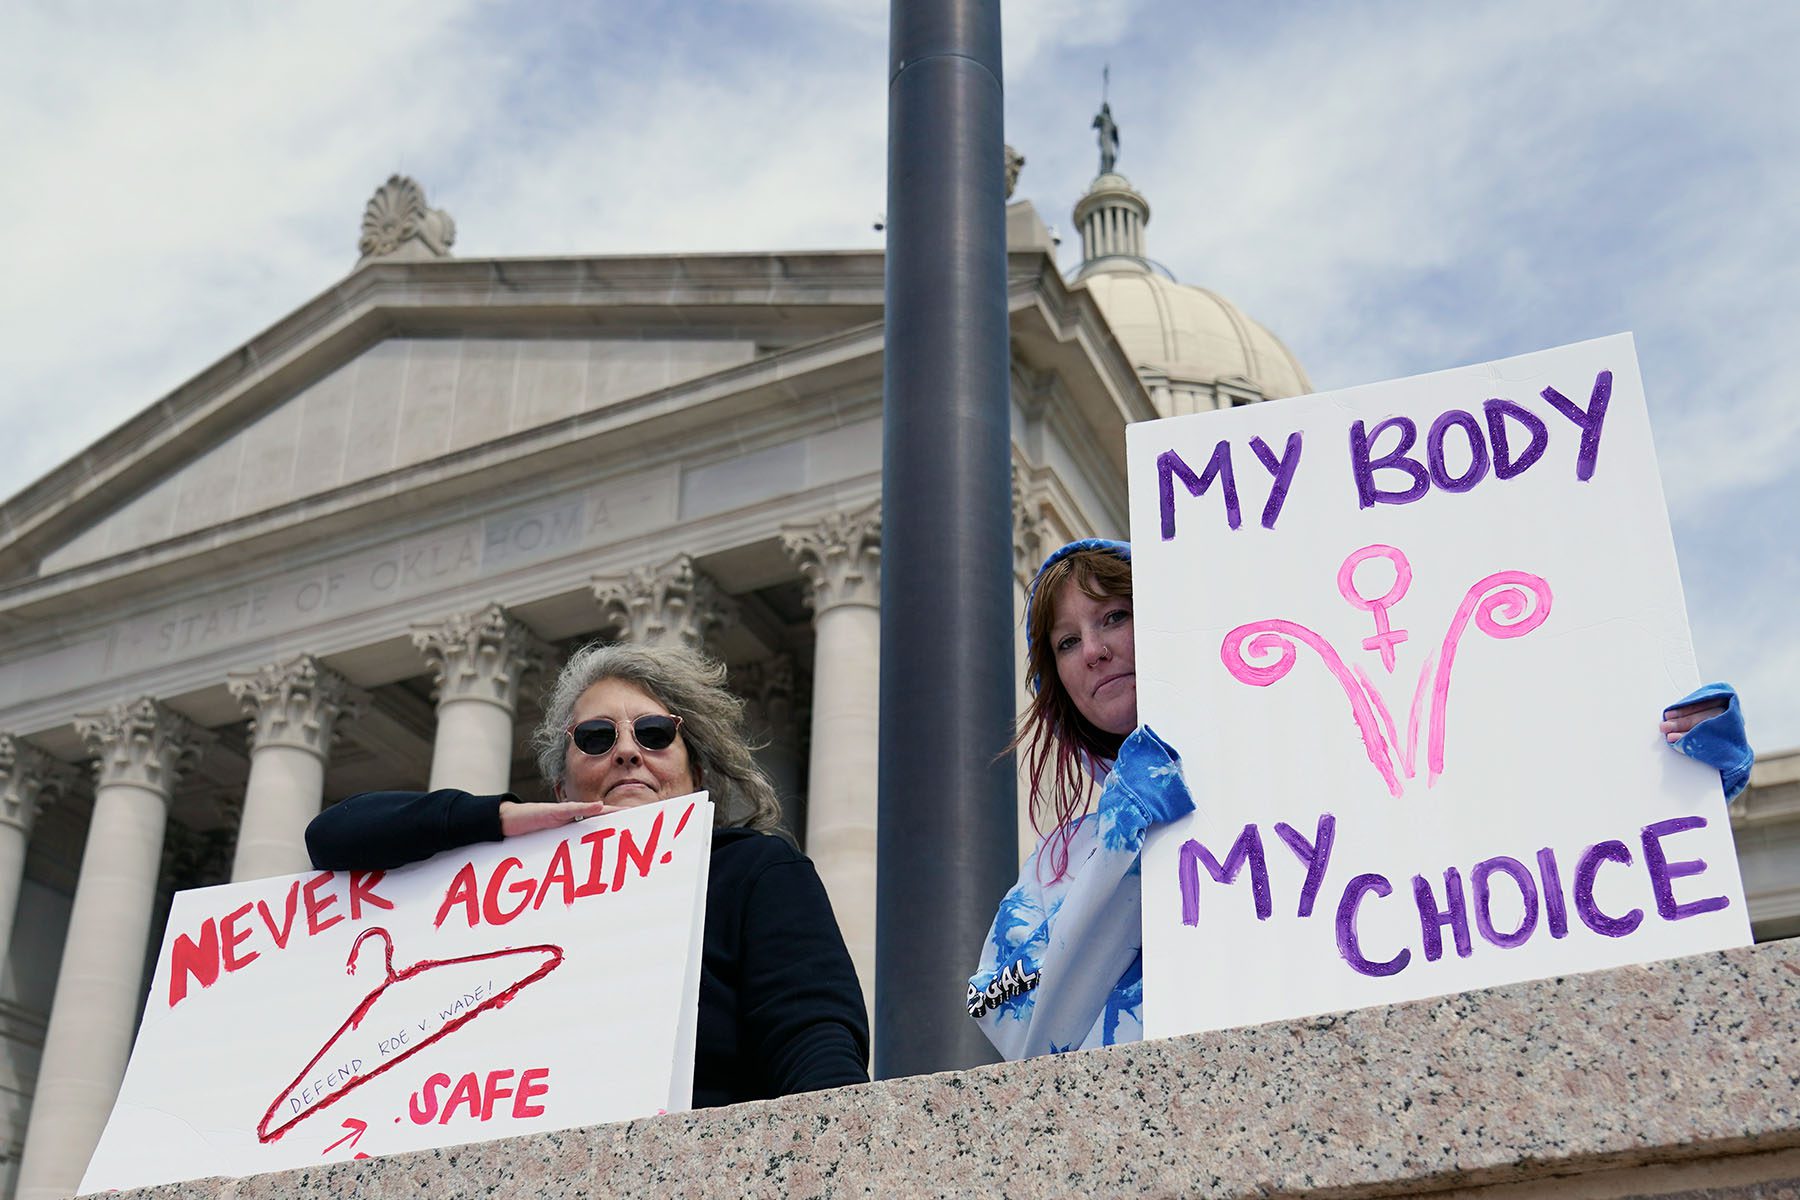 Abortion rights demonstrators hold signs at the Oklahoma state Capitol. One reads "My Body My Choice" and the other reads "Never Again" with a drawing of a clothes hanger.